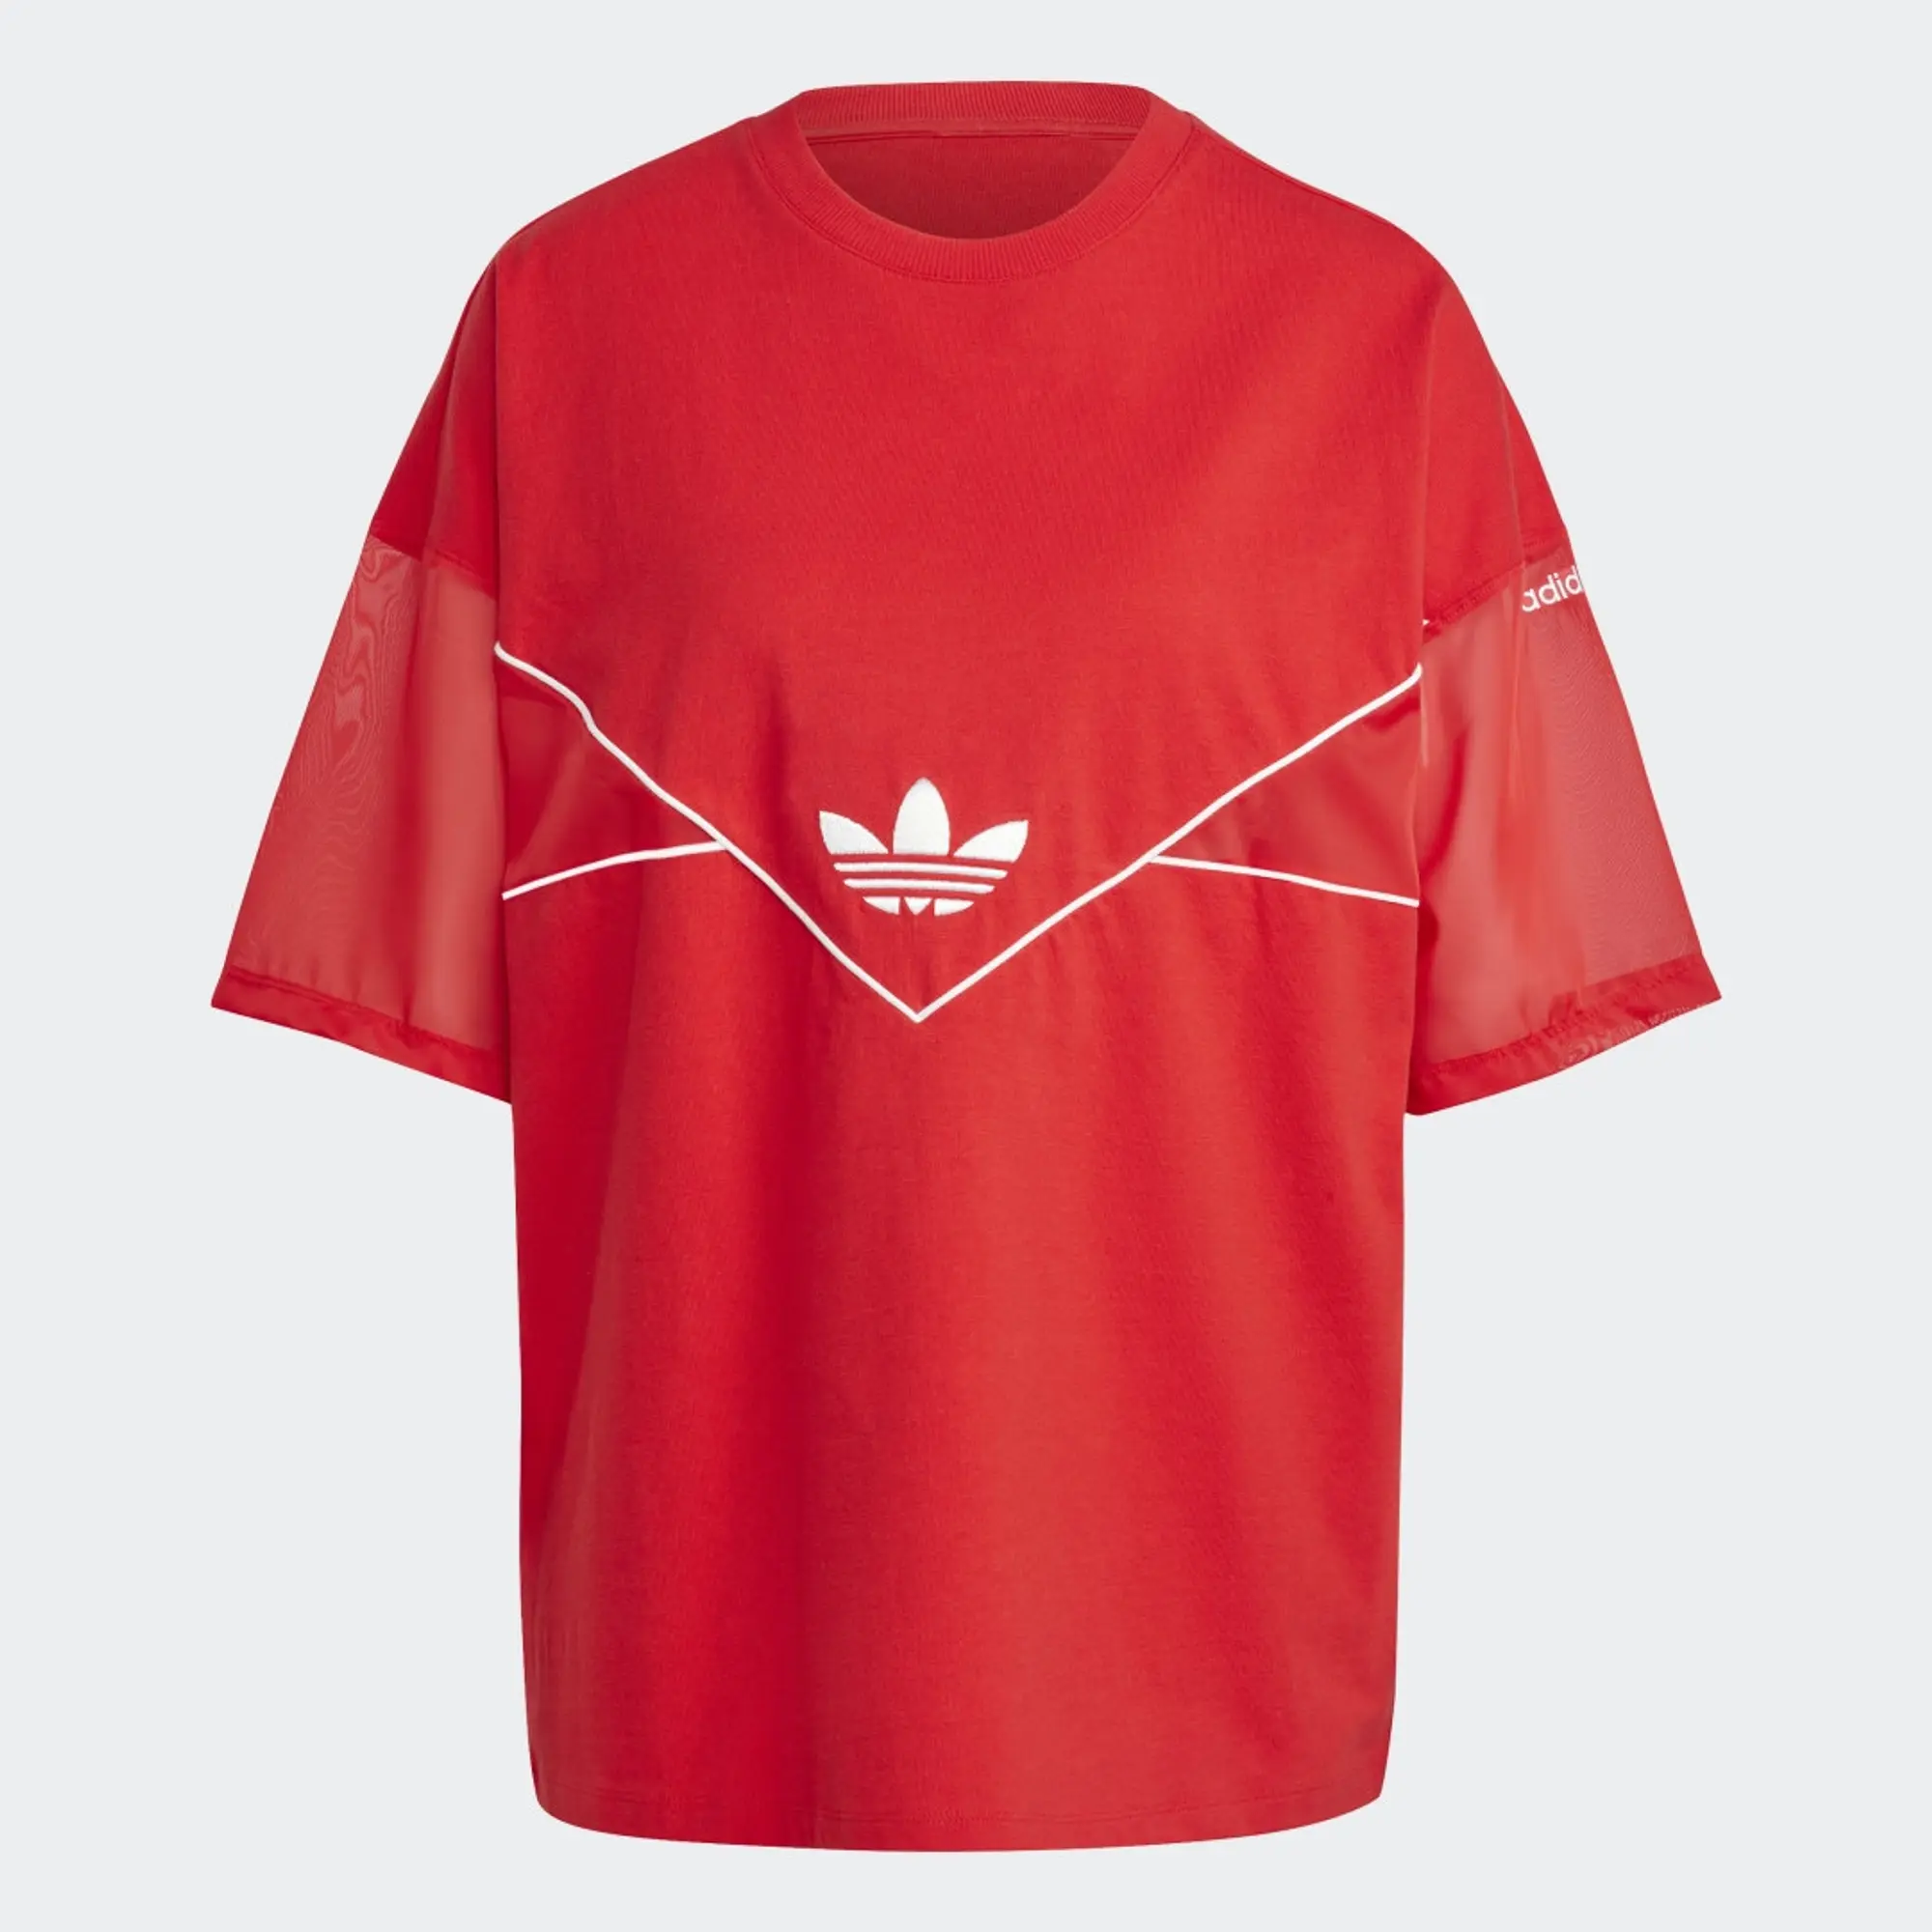 Stand Out In Style With The Adidas Originls T-shirt | IC5387